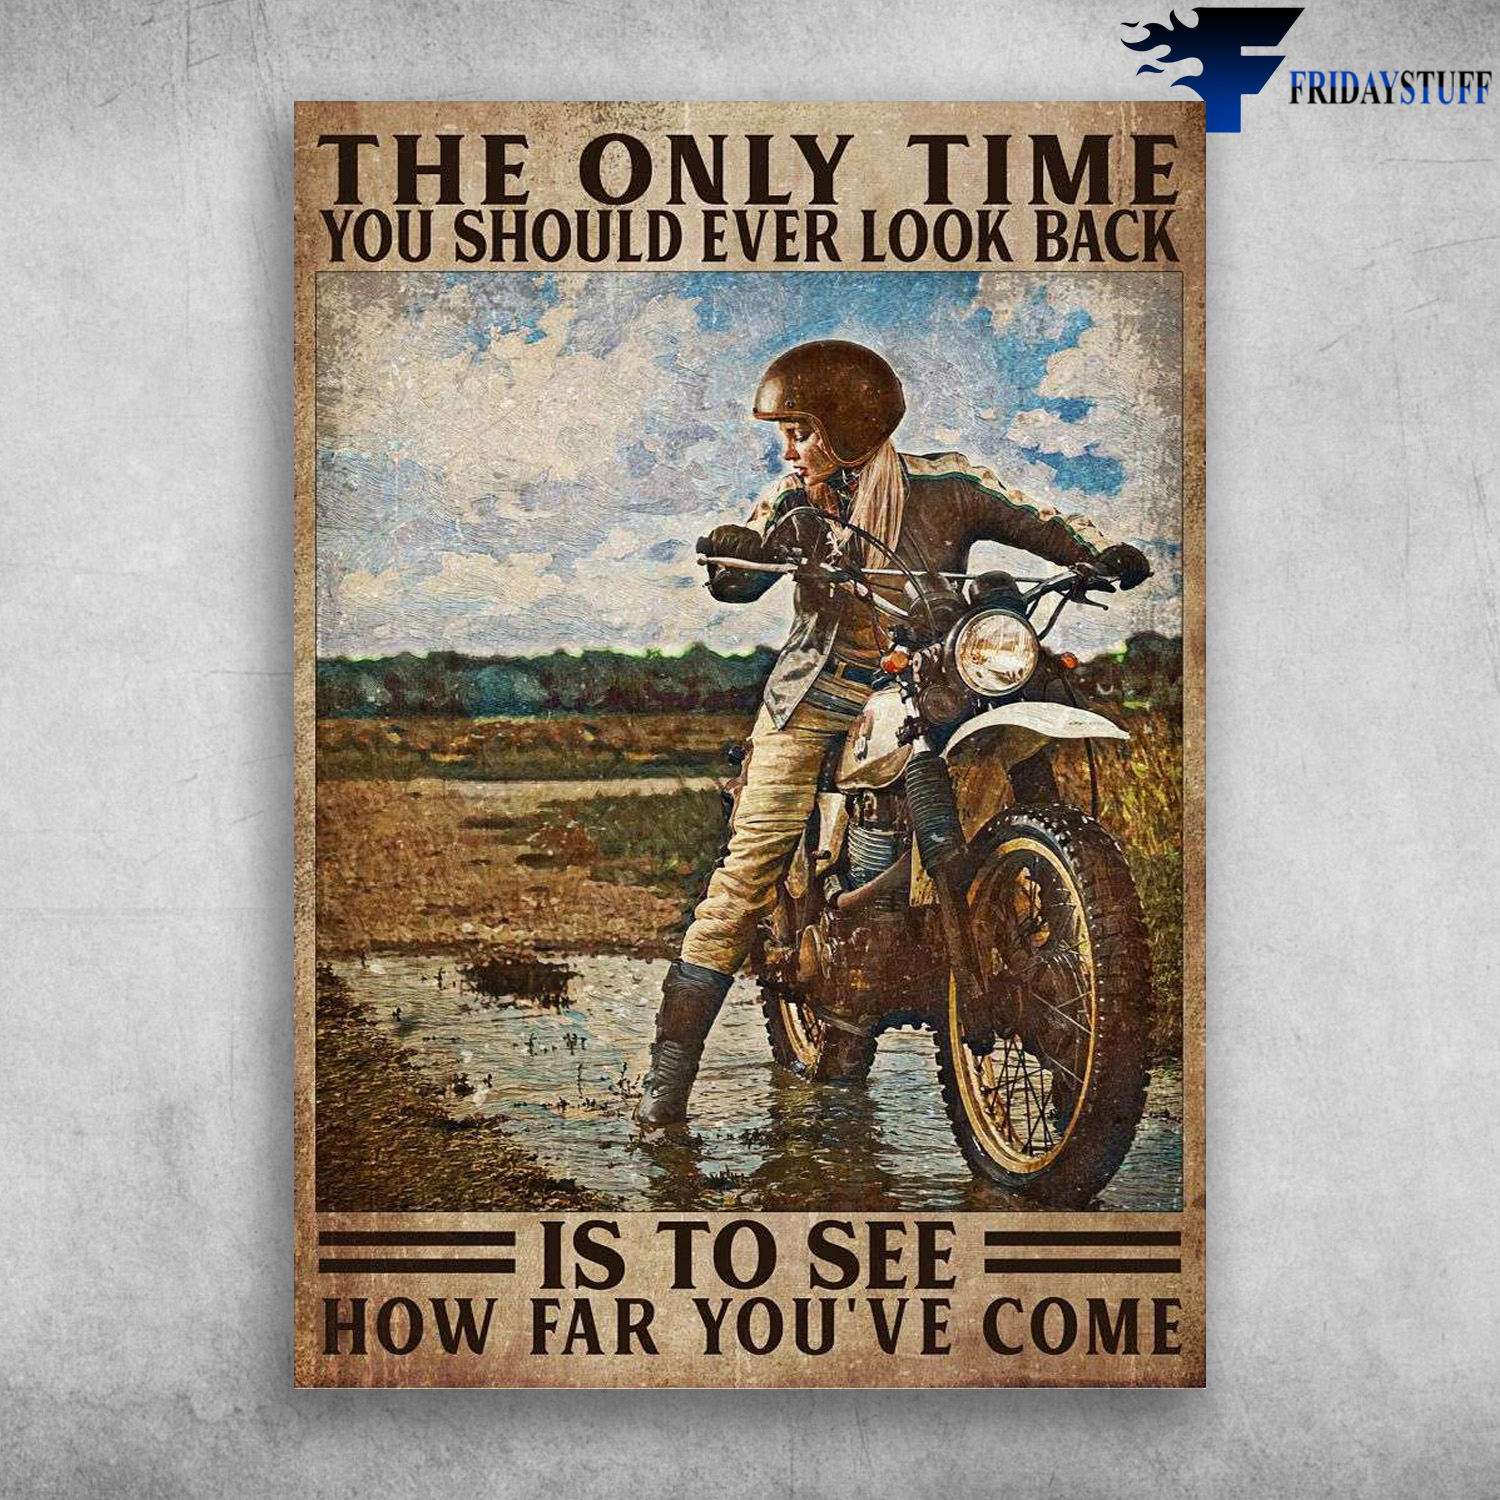 Motorcycle Lady, Girl Riding - The Only Time, You Should Ever Look Back, Is To See, How Far You've Come